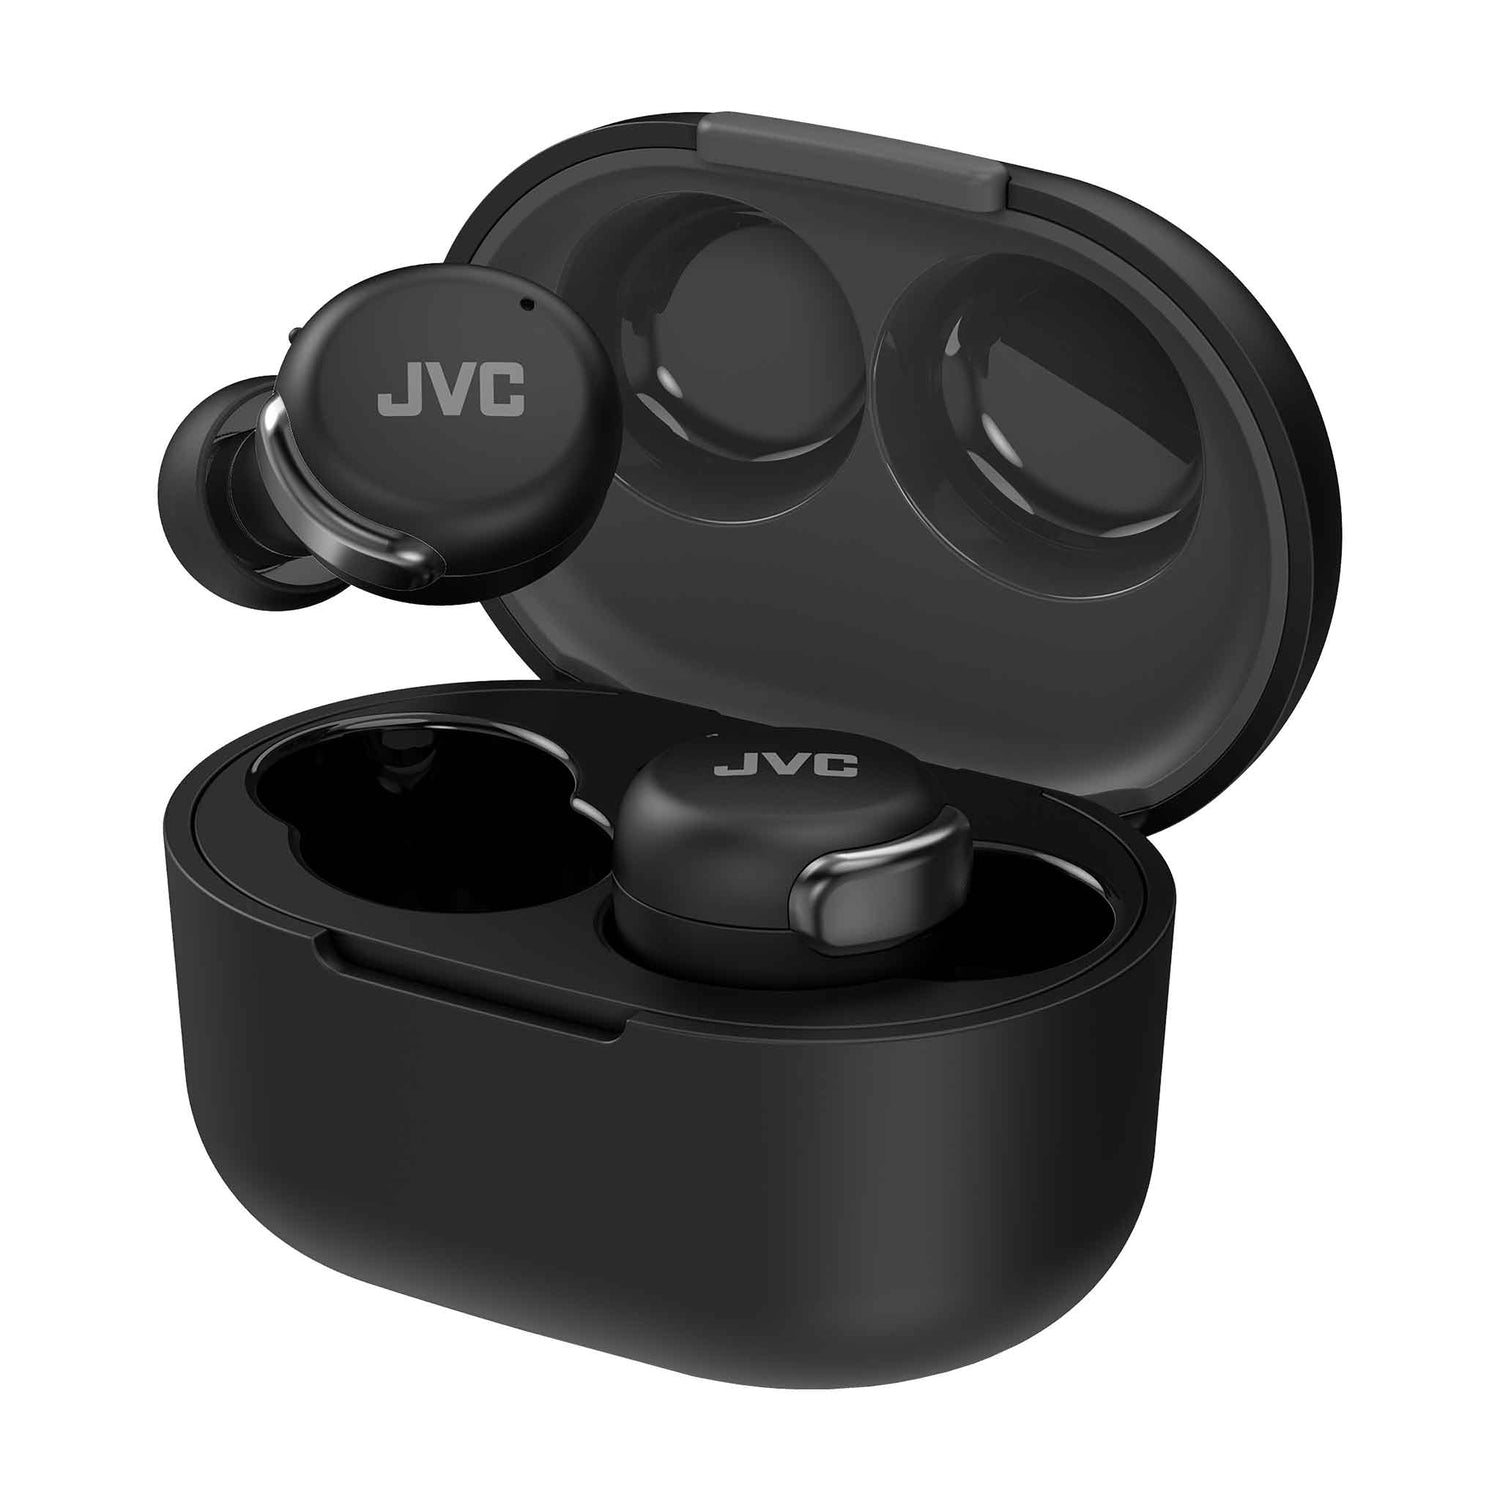 HA-A30T-B noise cancelling earbuds with open case